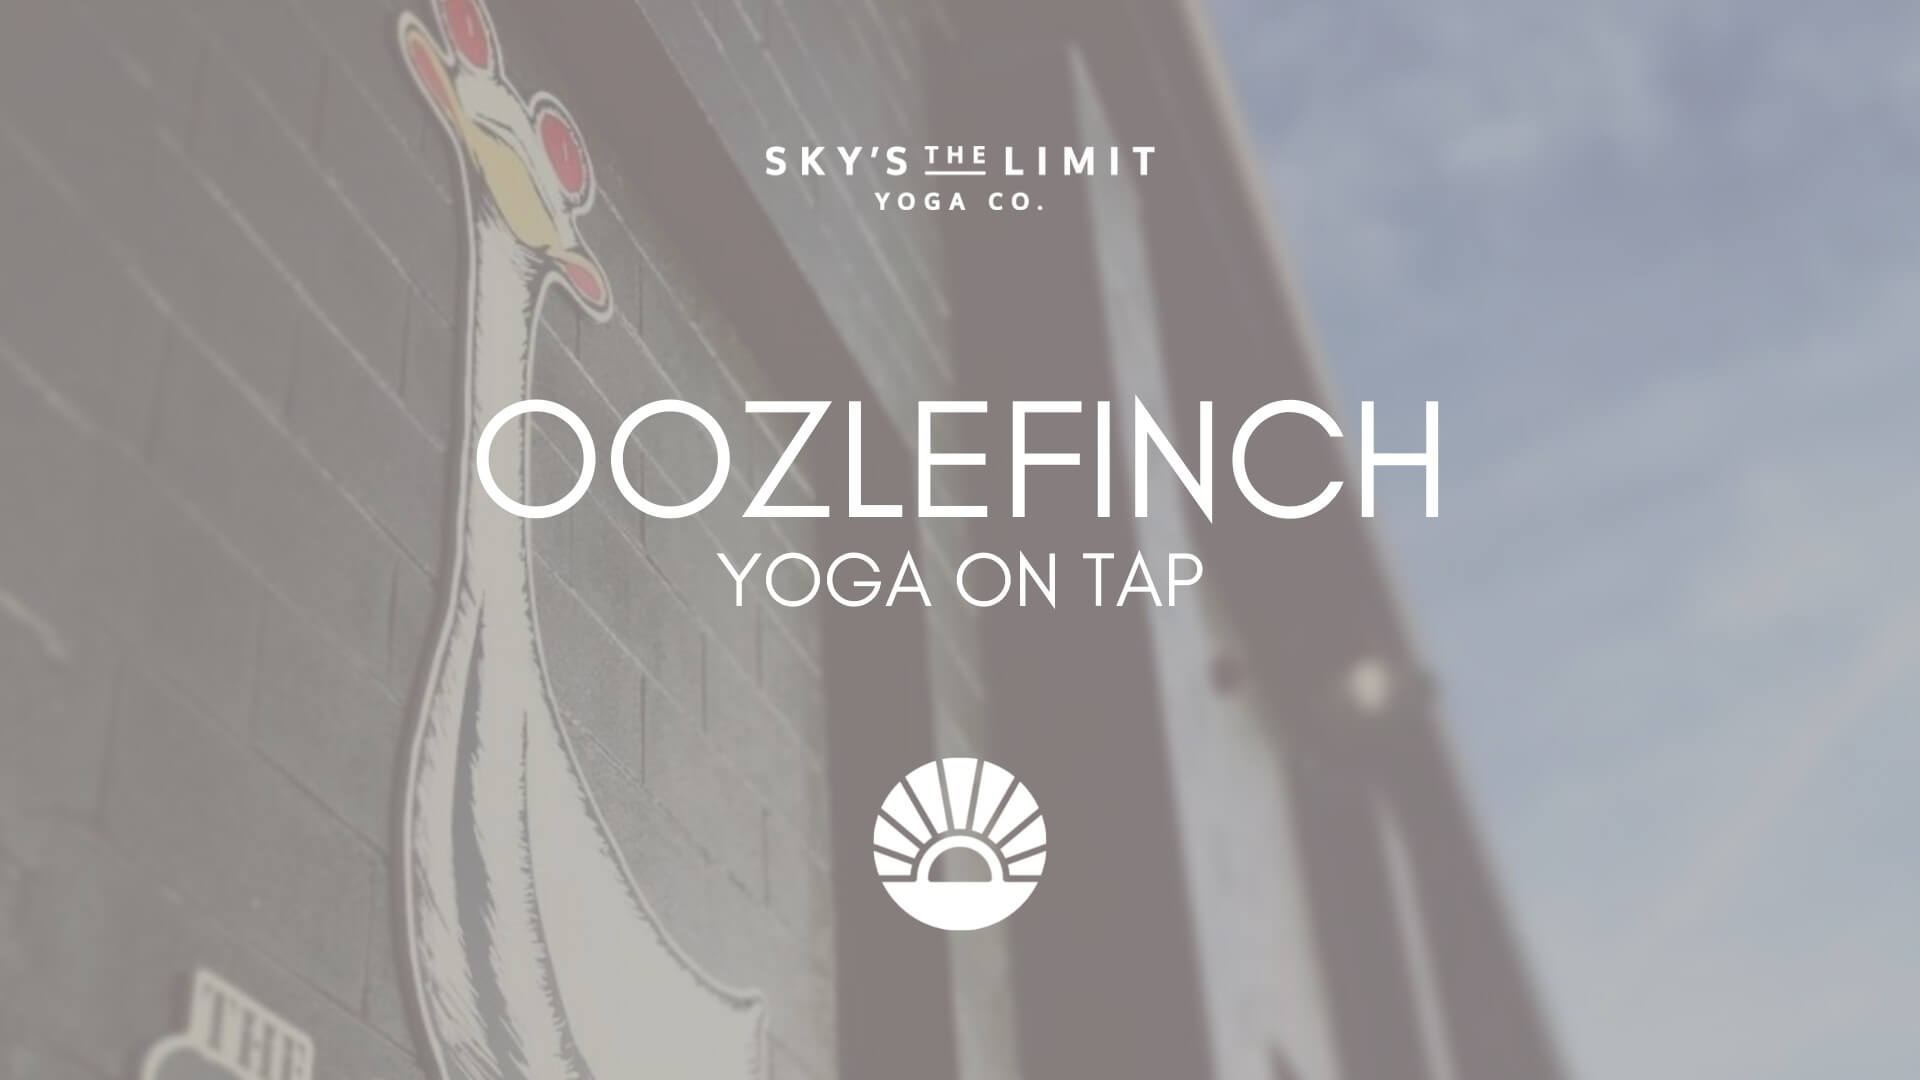 Sky's the Limit Yoga Co. Ooozlefinch Yoga on Tap